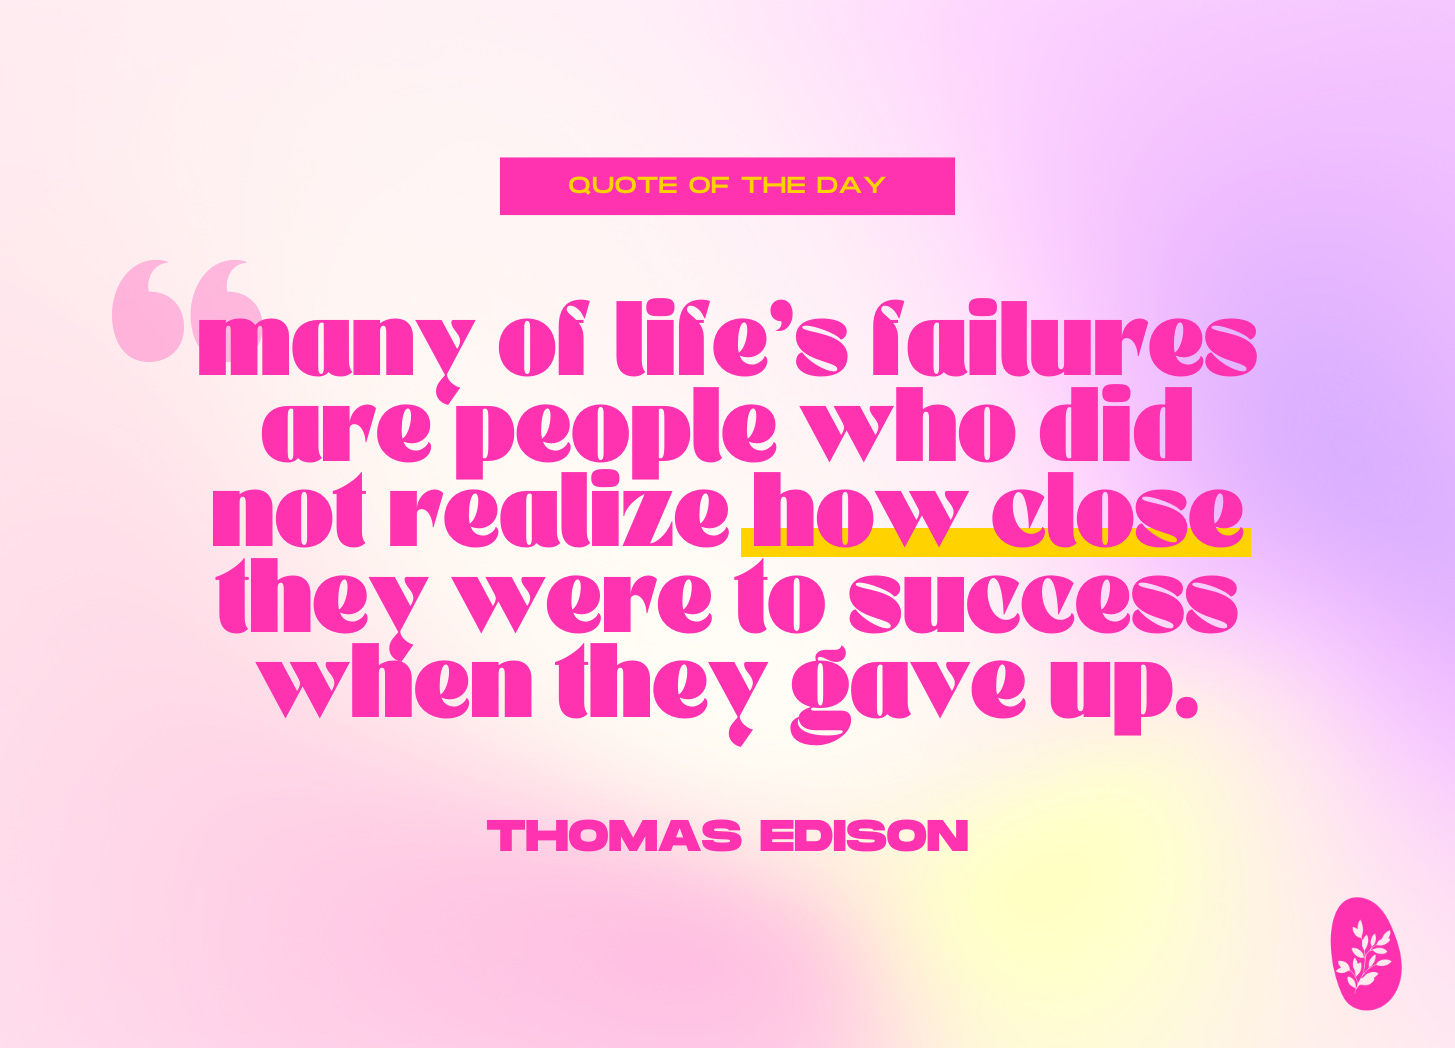 Quote of the day: Many of life's failures are people who did not realize how close they were to success when they gave up. — Thomas Edison